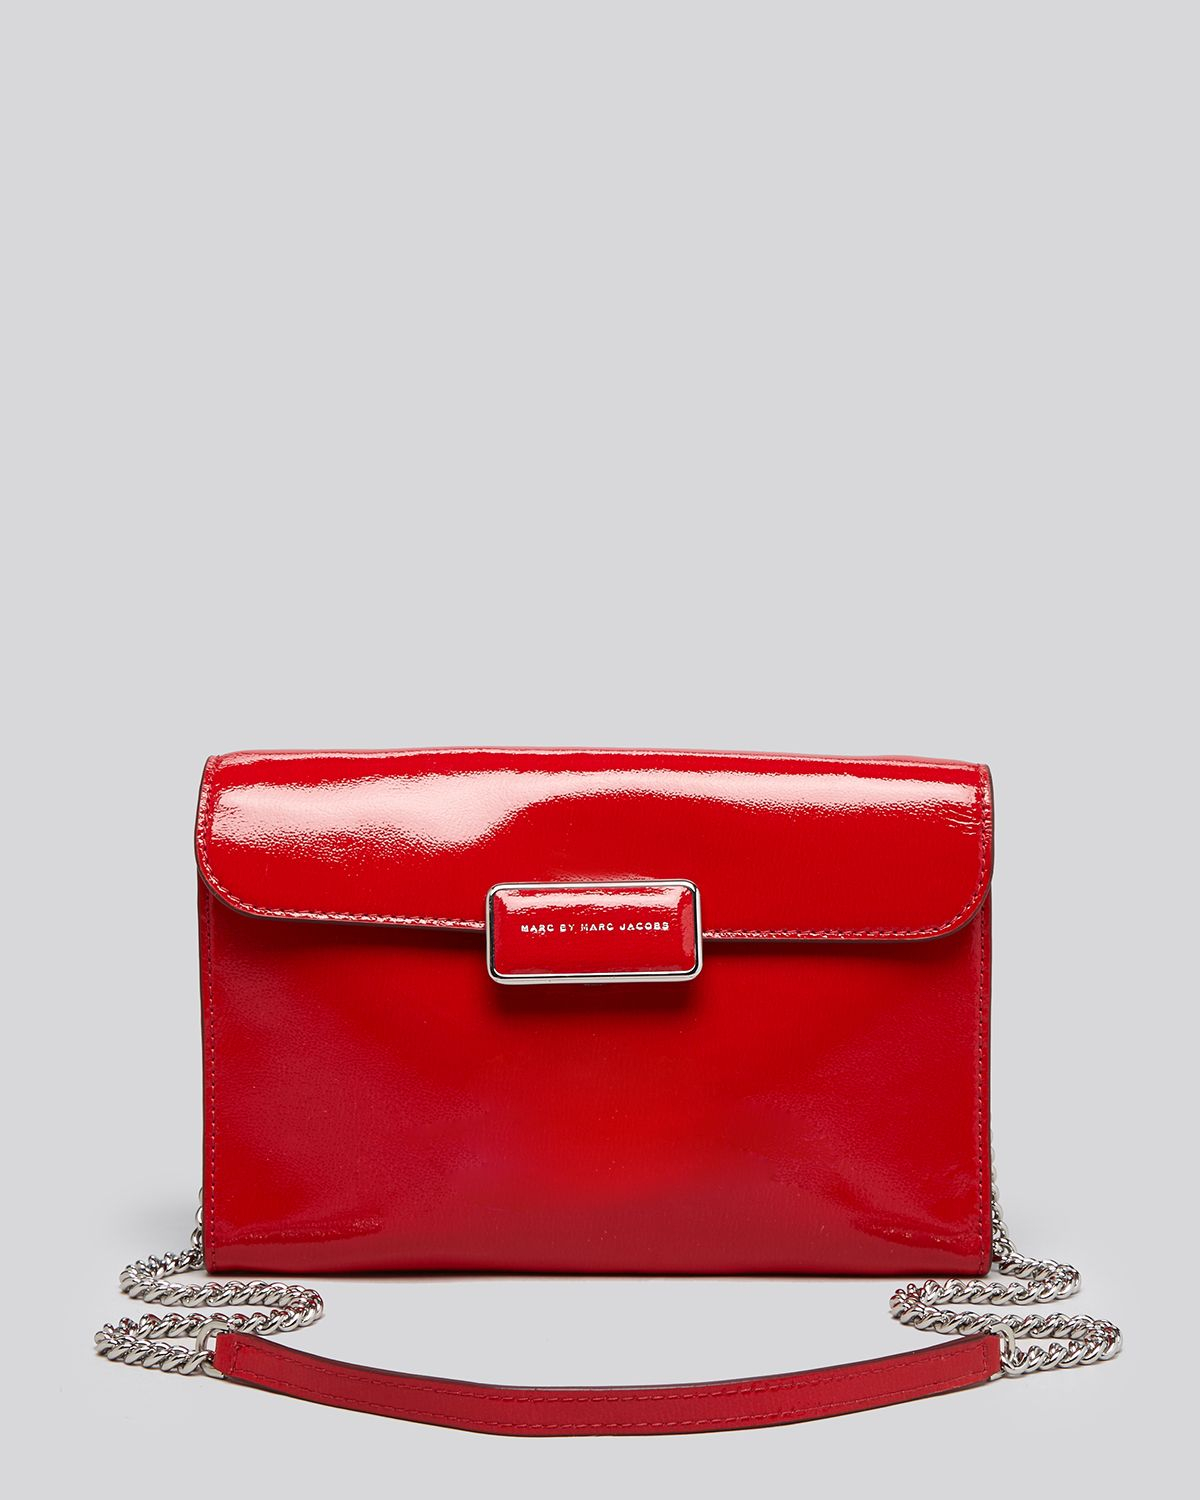 Marc By Marc Jacobs Clutch - Pegg Convertible in Red - Lyst